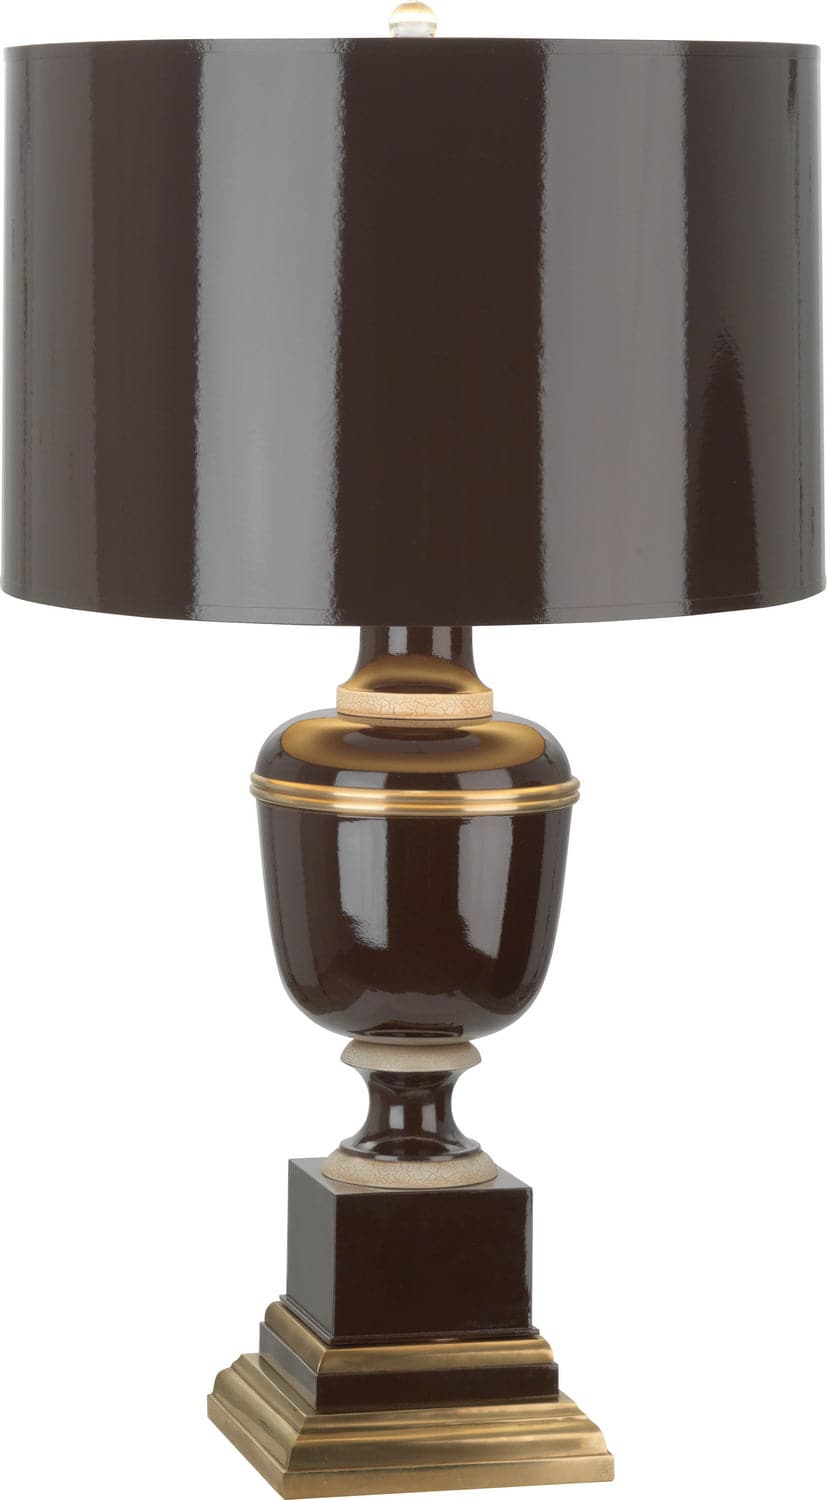 Robert Abbey - 2506 - One Light Accent Lamp - Annika - Chocolate Lacquered Paint w/Natural Brass and Ivory Crackle